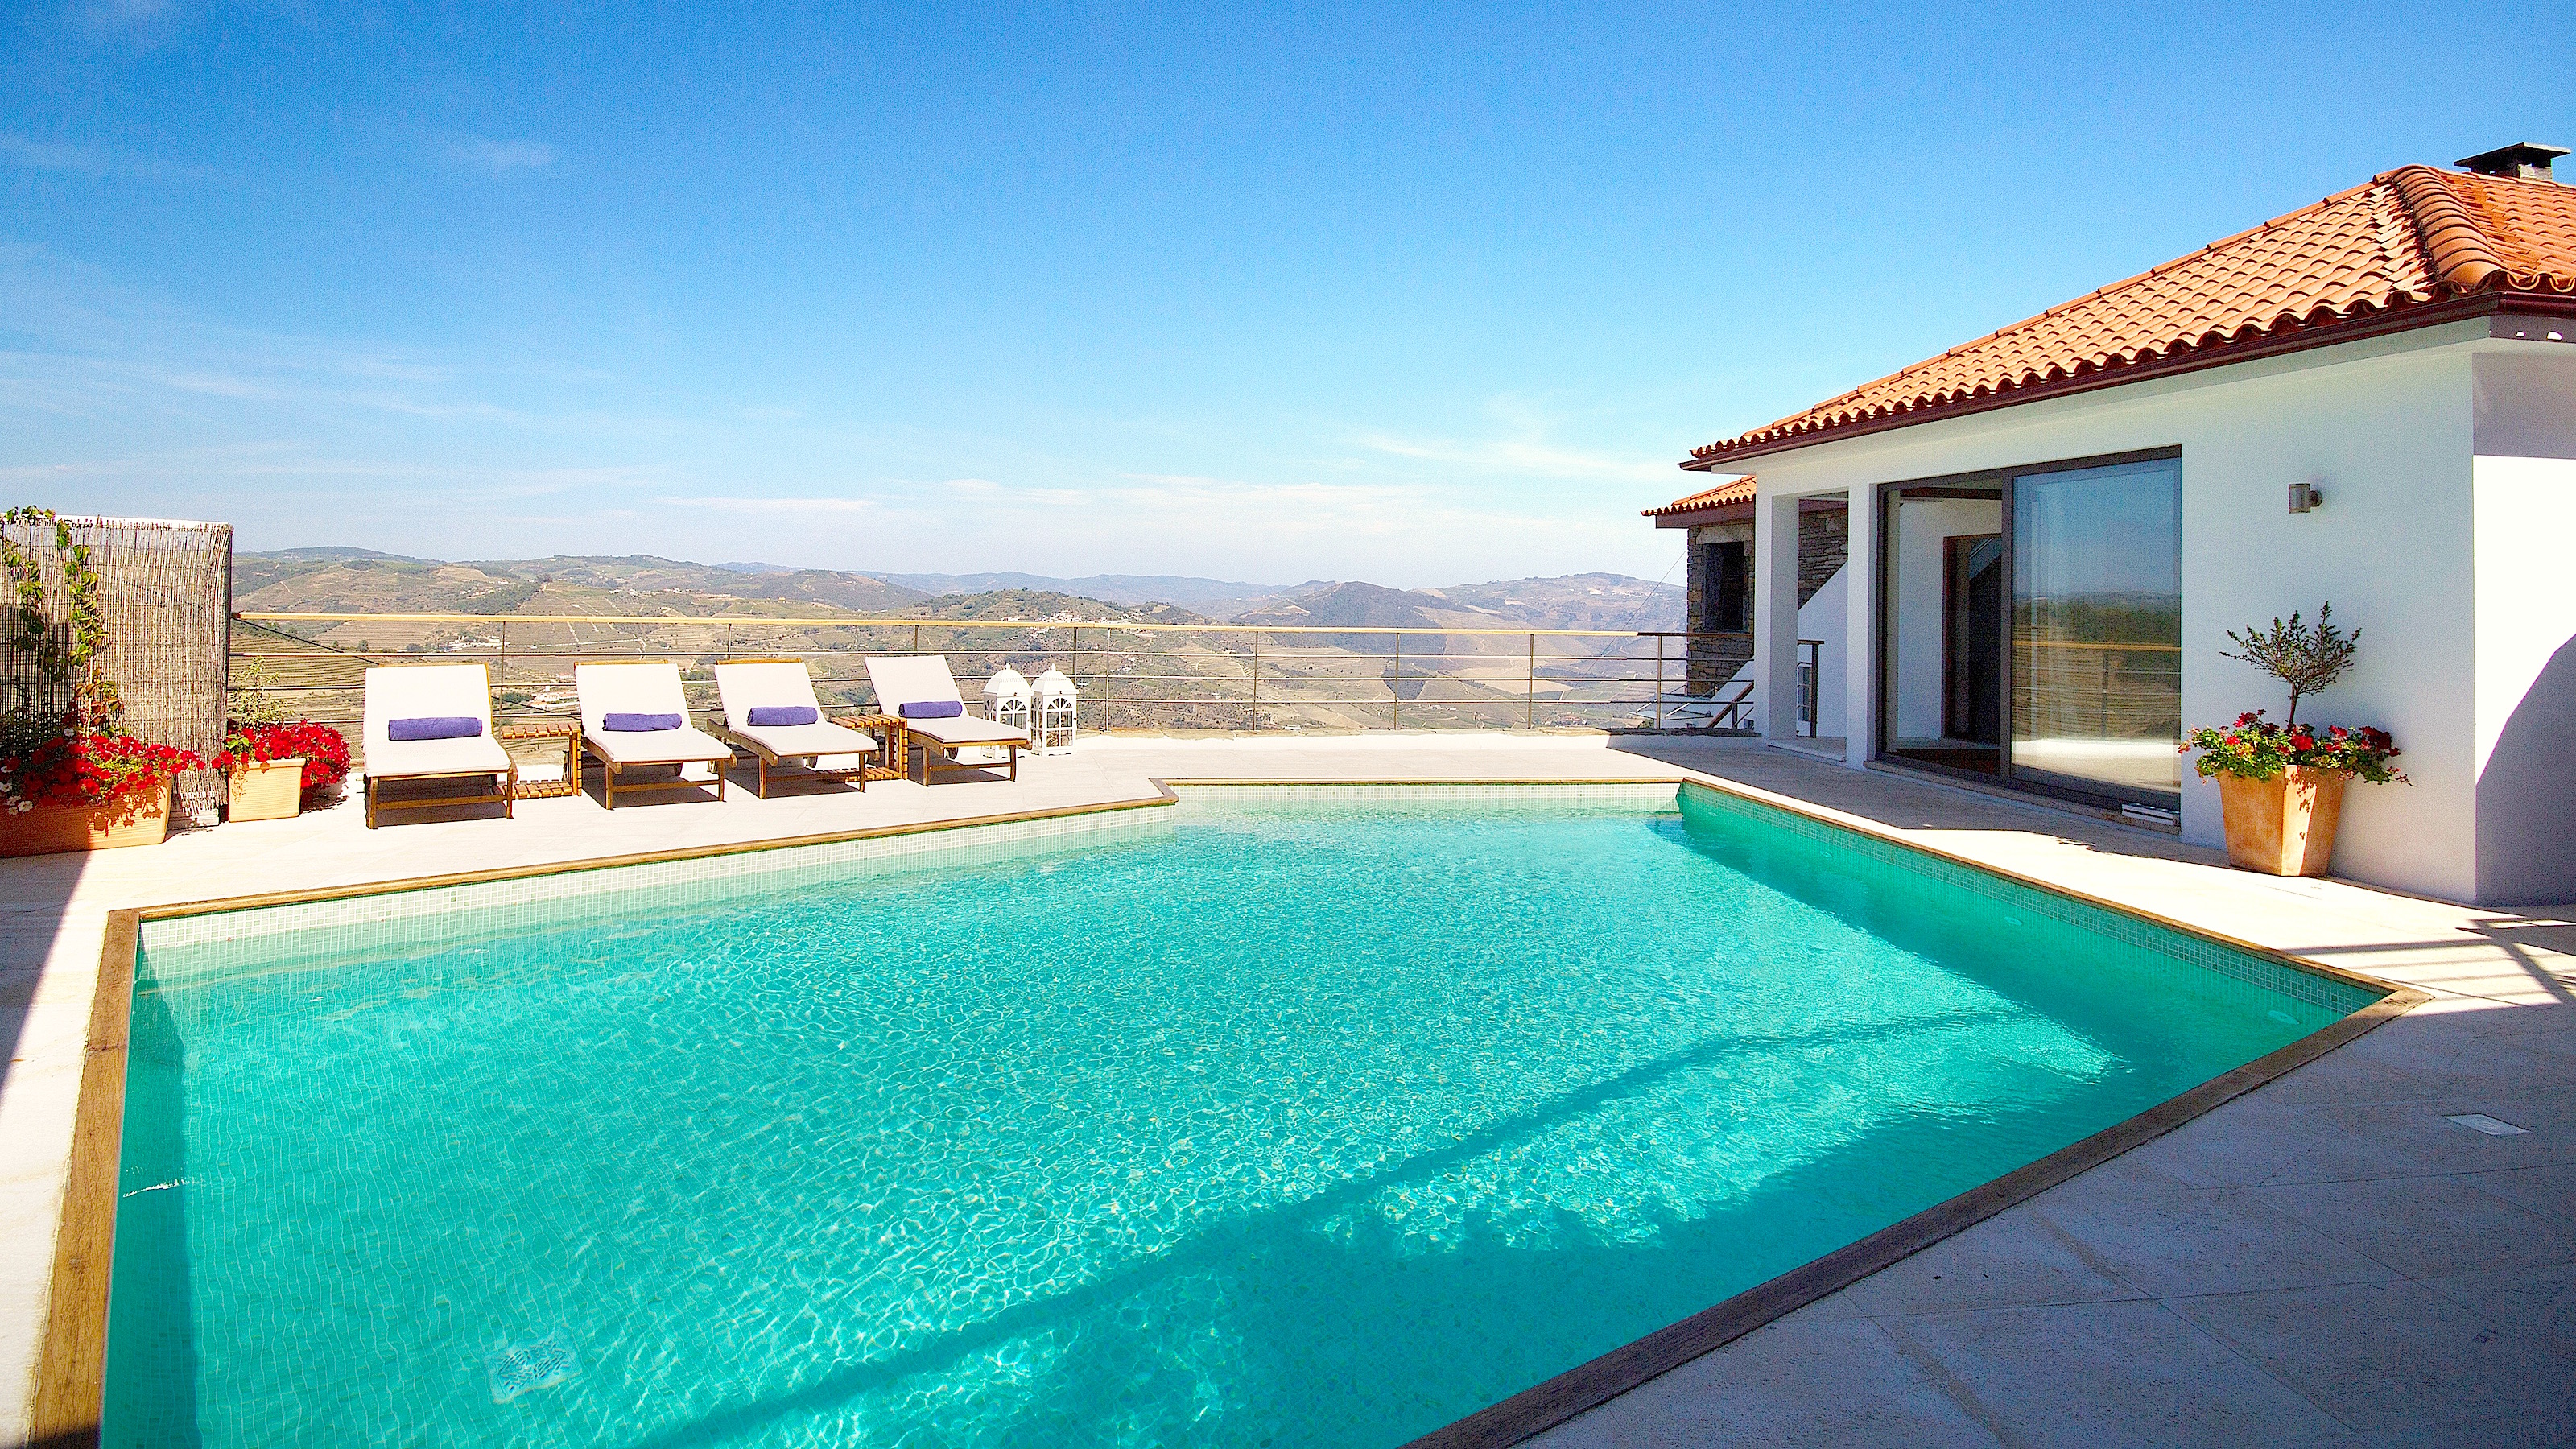 Property Image 2 - 3 Bedroom Luxury Villa With pool and Douro Valley Scenery Views